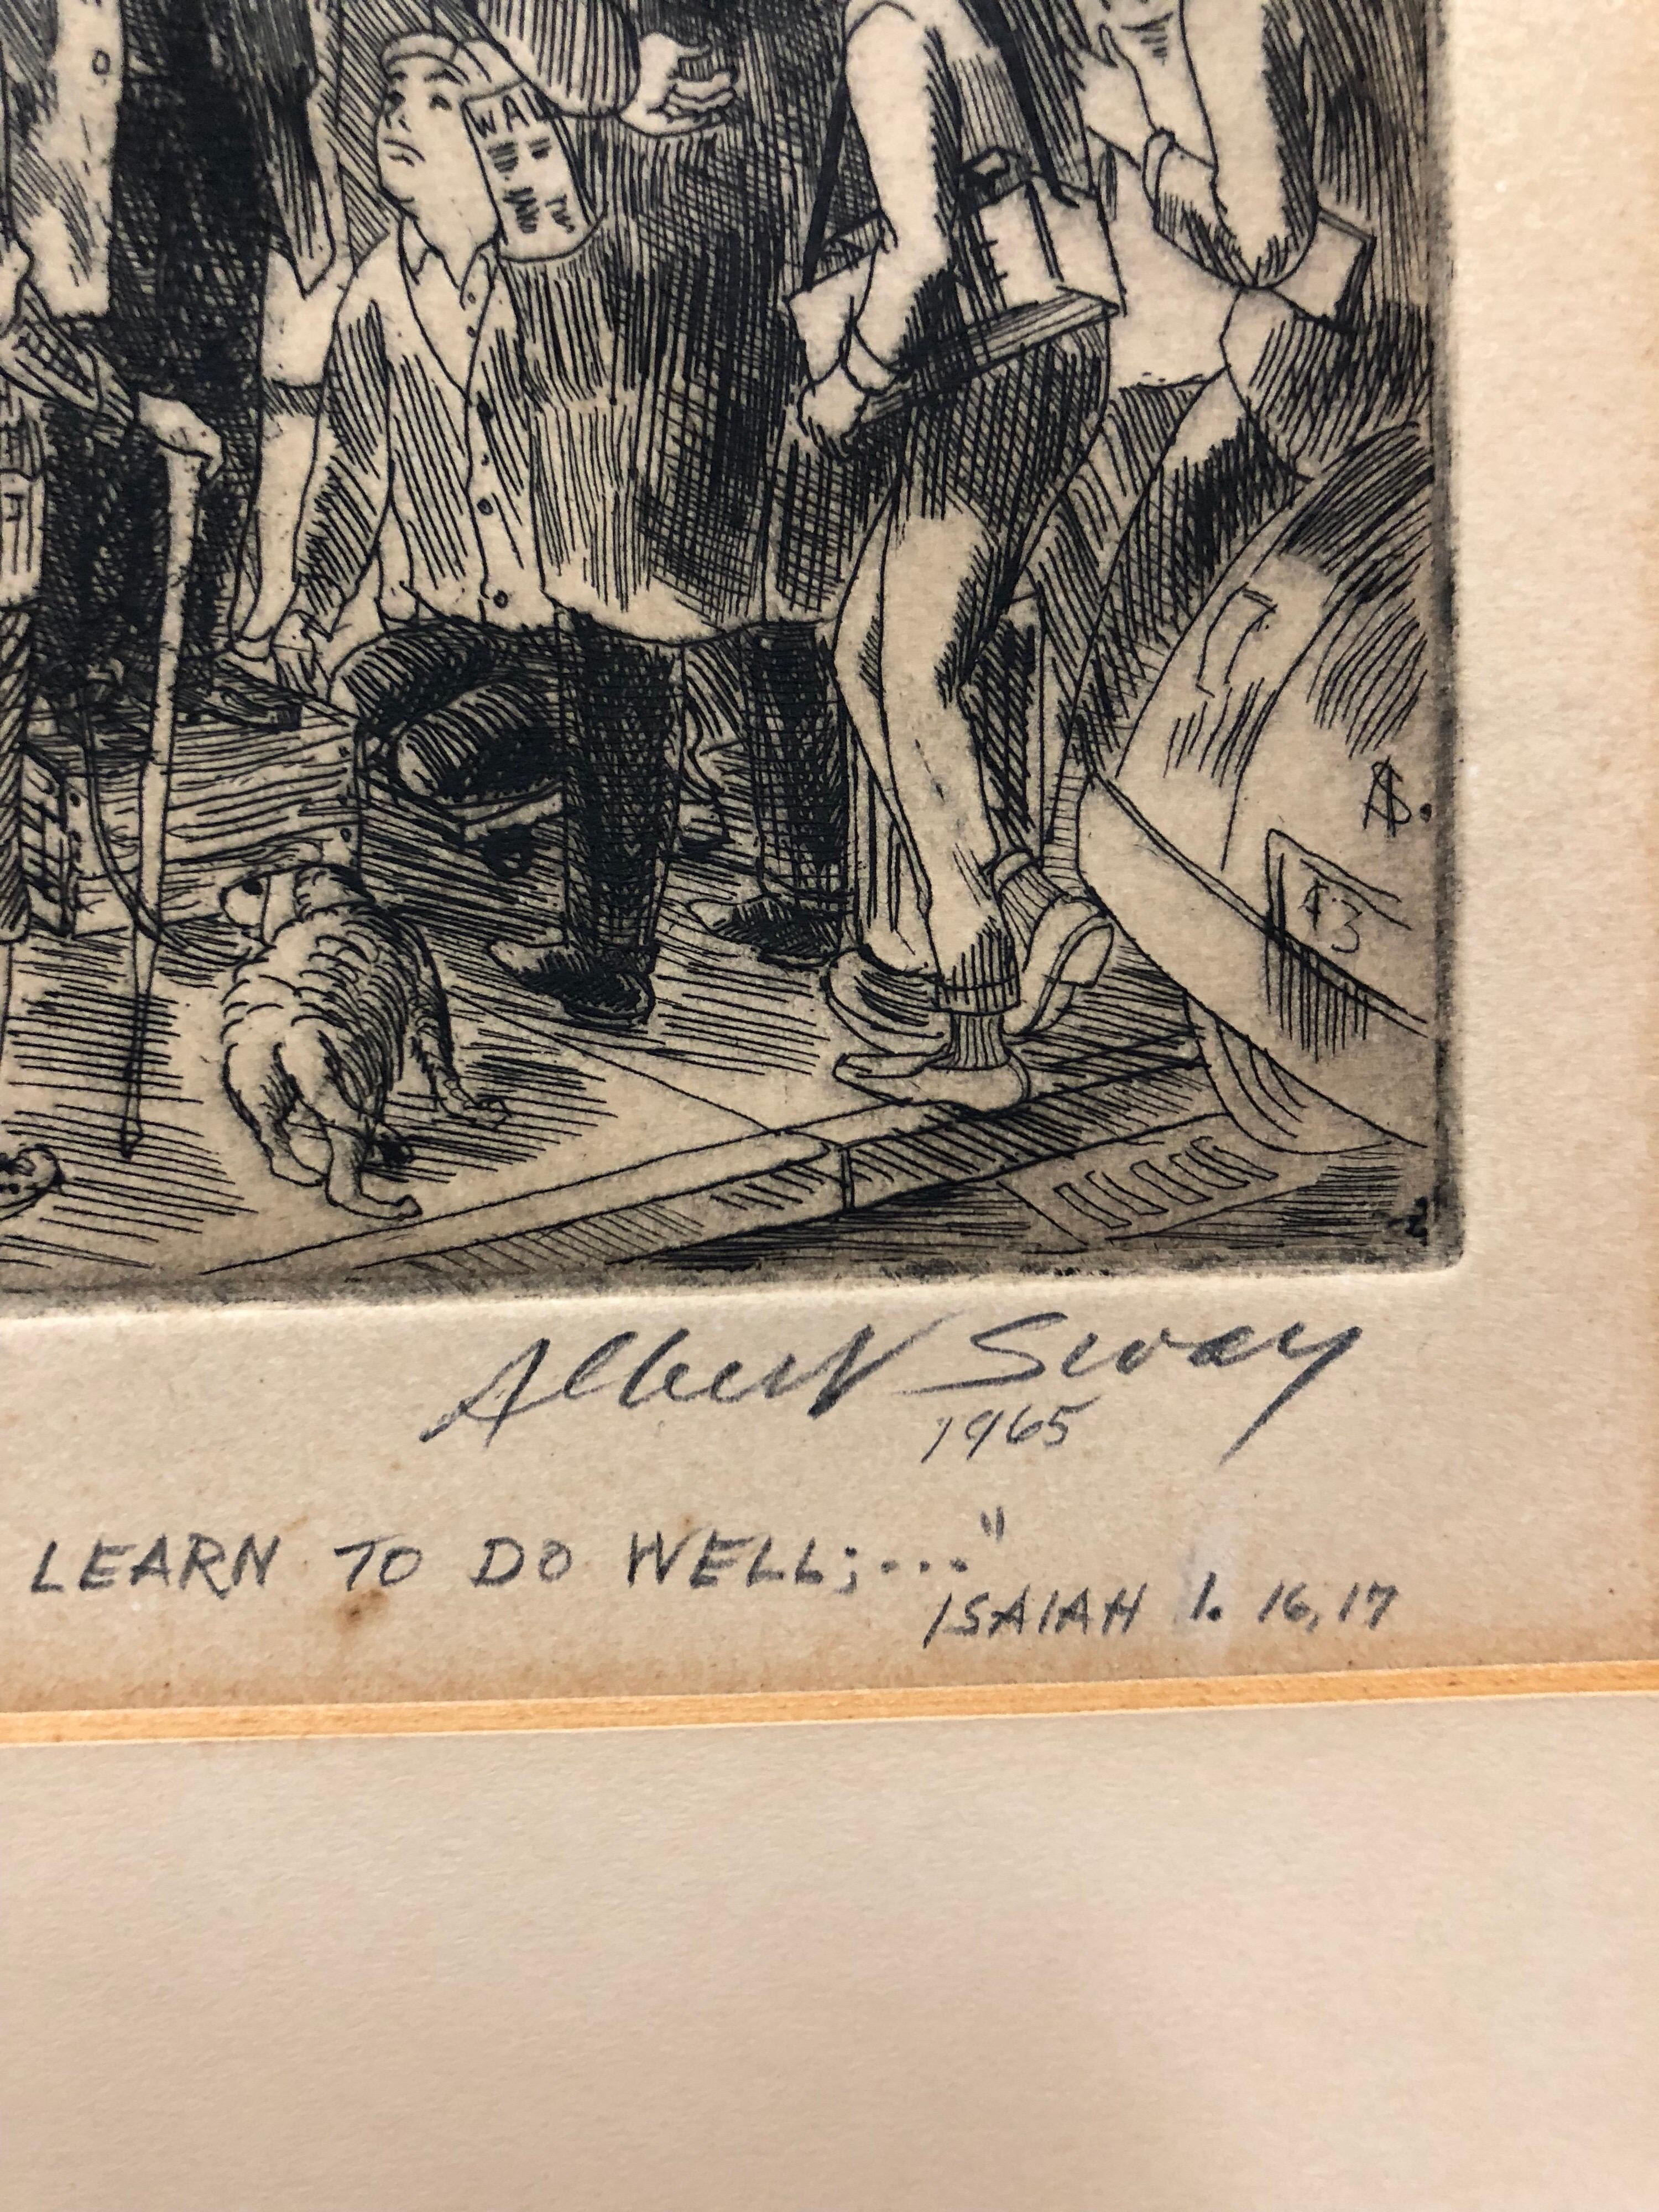 18.5x15.5, 6.25 x 5 mat cut size. edition 1/6 signed and dated.

Albert Sway (b.1913) 
Painter, illustrator, etcher, lithographer, cartoonist and teacher, Albert Sway was born in Cincinnati in 1913. He studied at the Cincinnati Art Academy and the